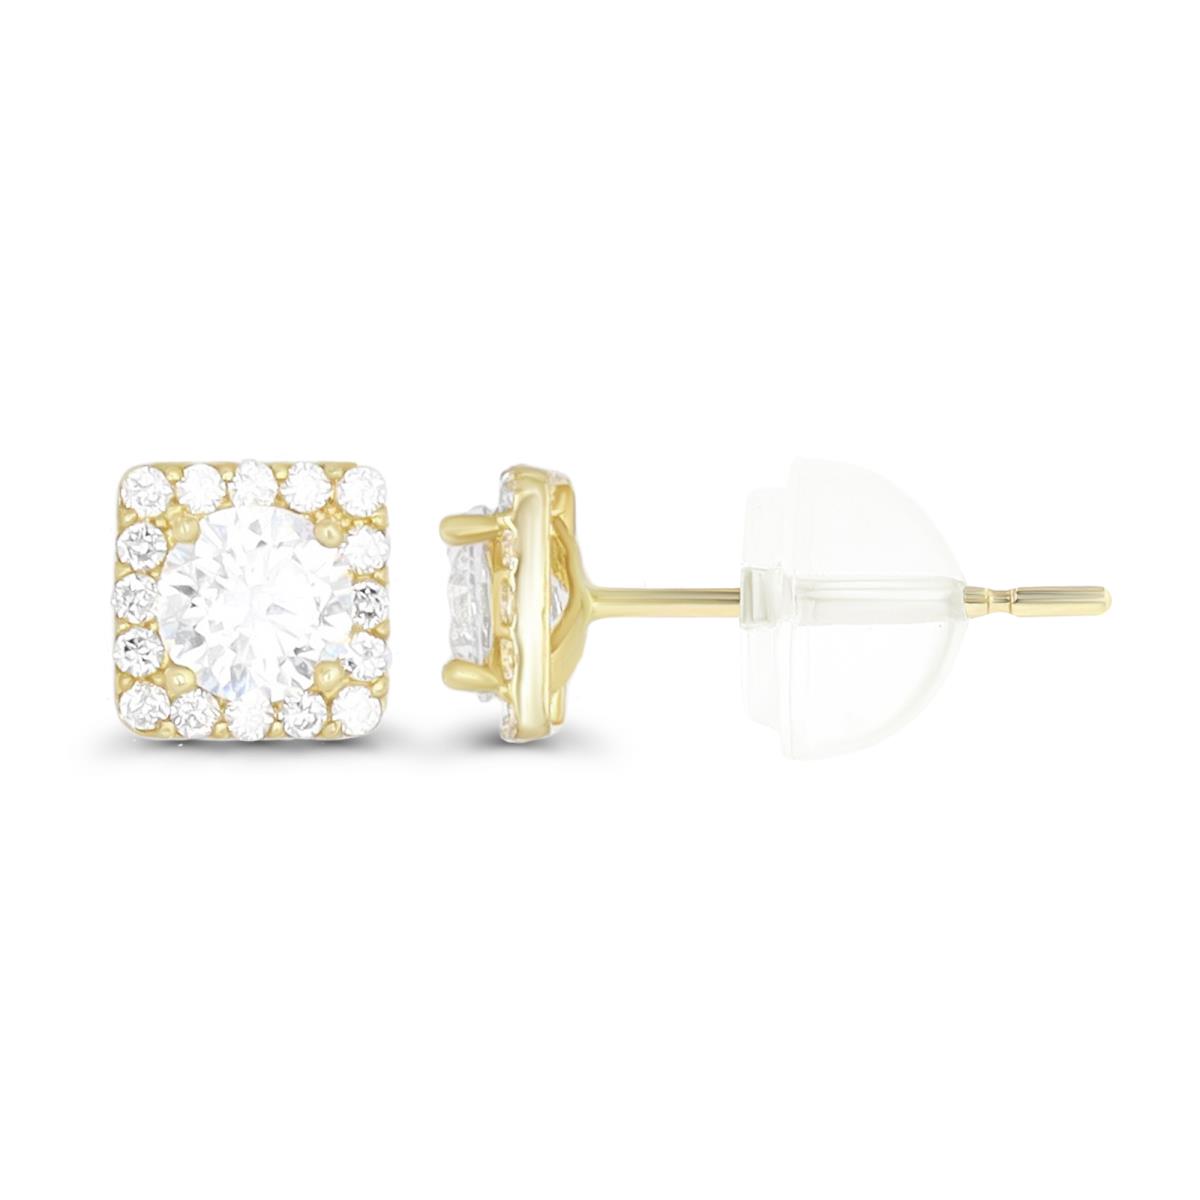 10K Yellow Gold Pave 4mm Rd Cut Square Halo Stud Earring with Bubble Silicone Back